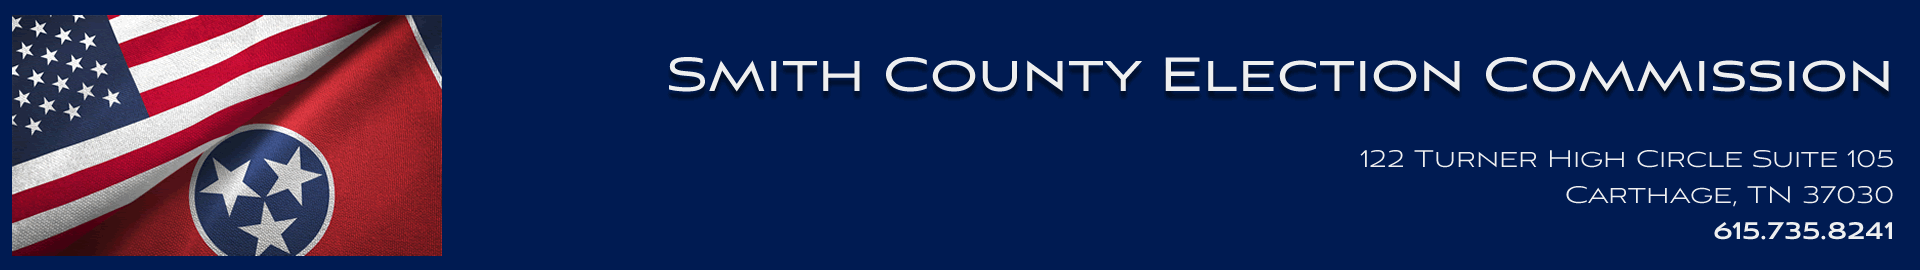 Smith County Election Commission - Smith County, TN